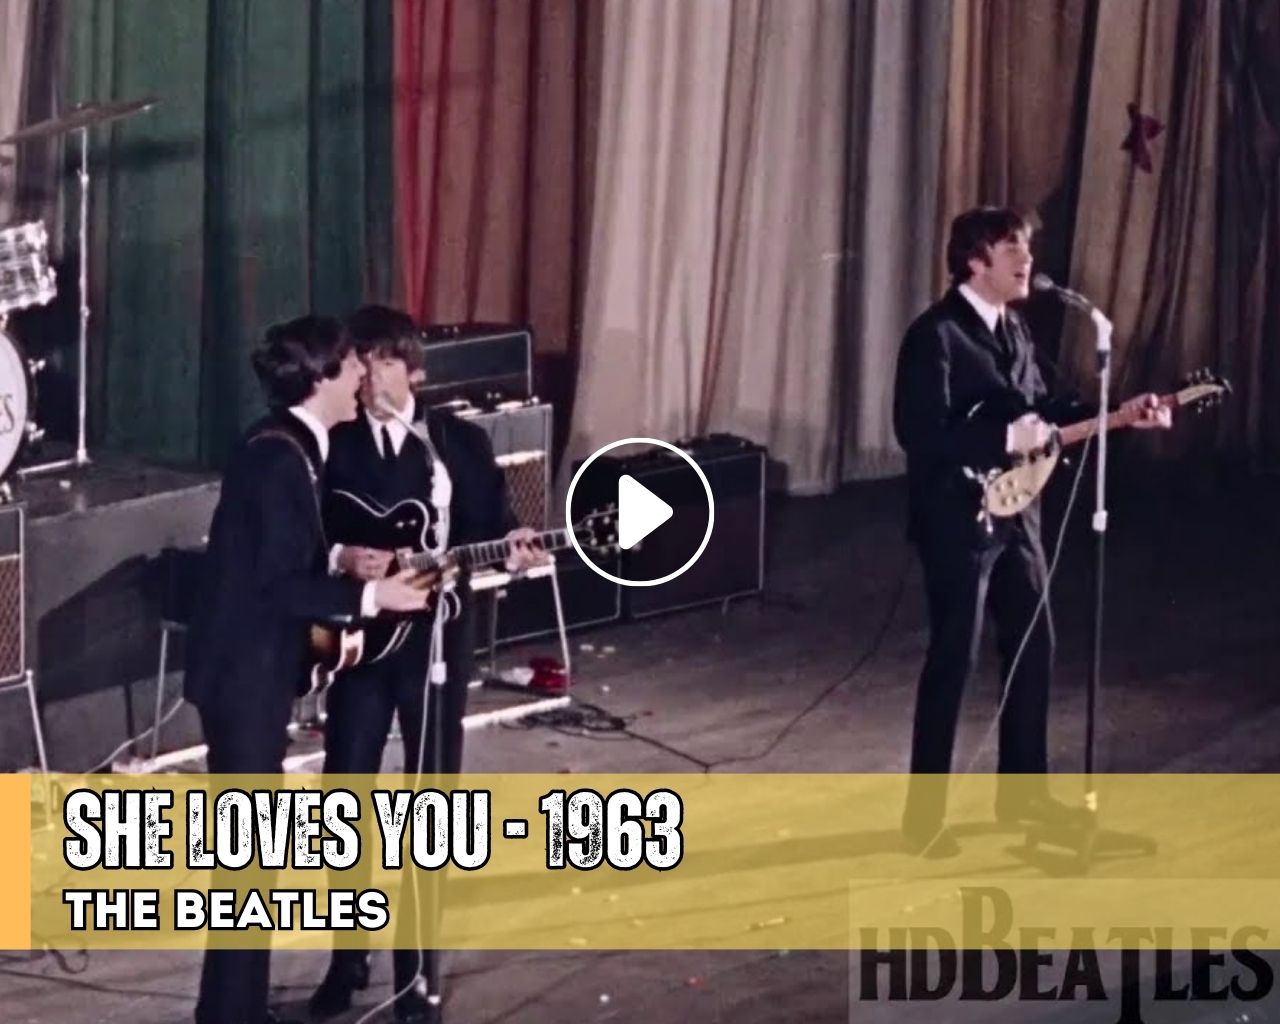 The Beatles - She Loves You 1963